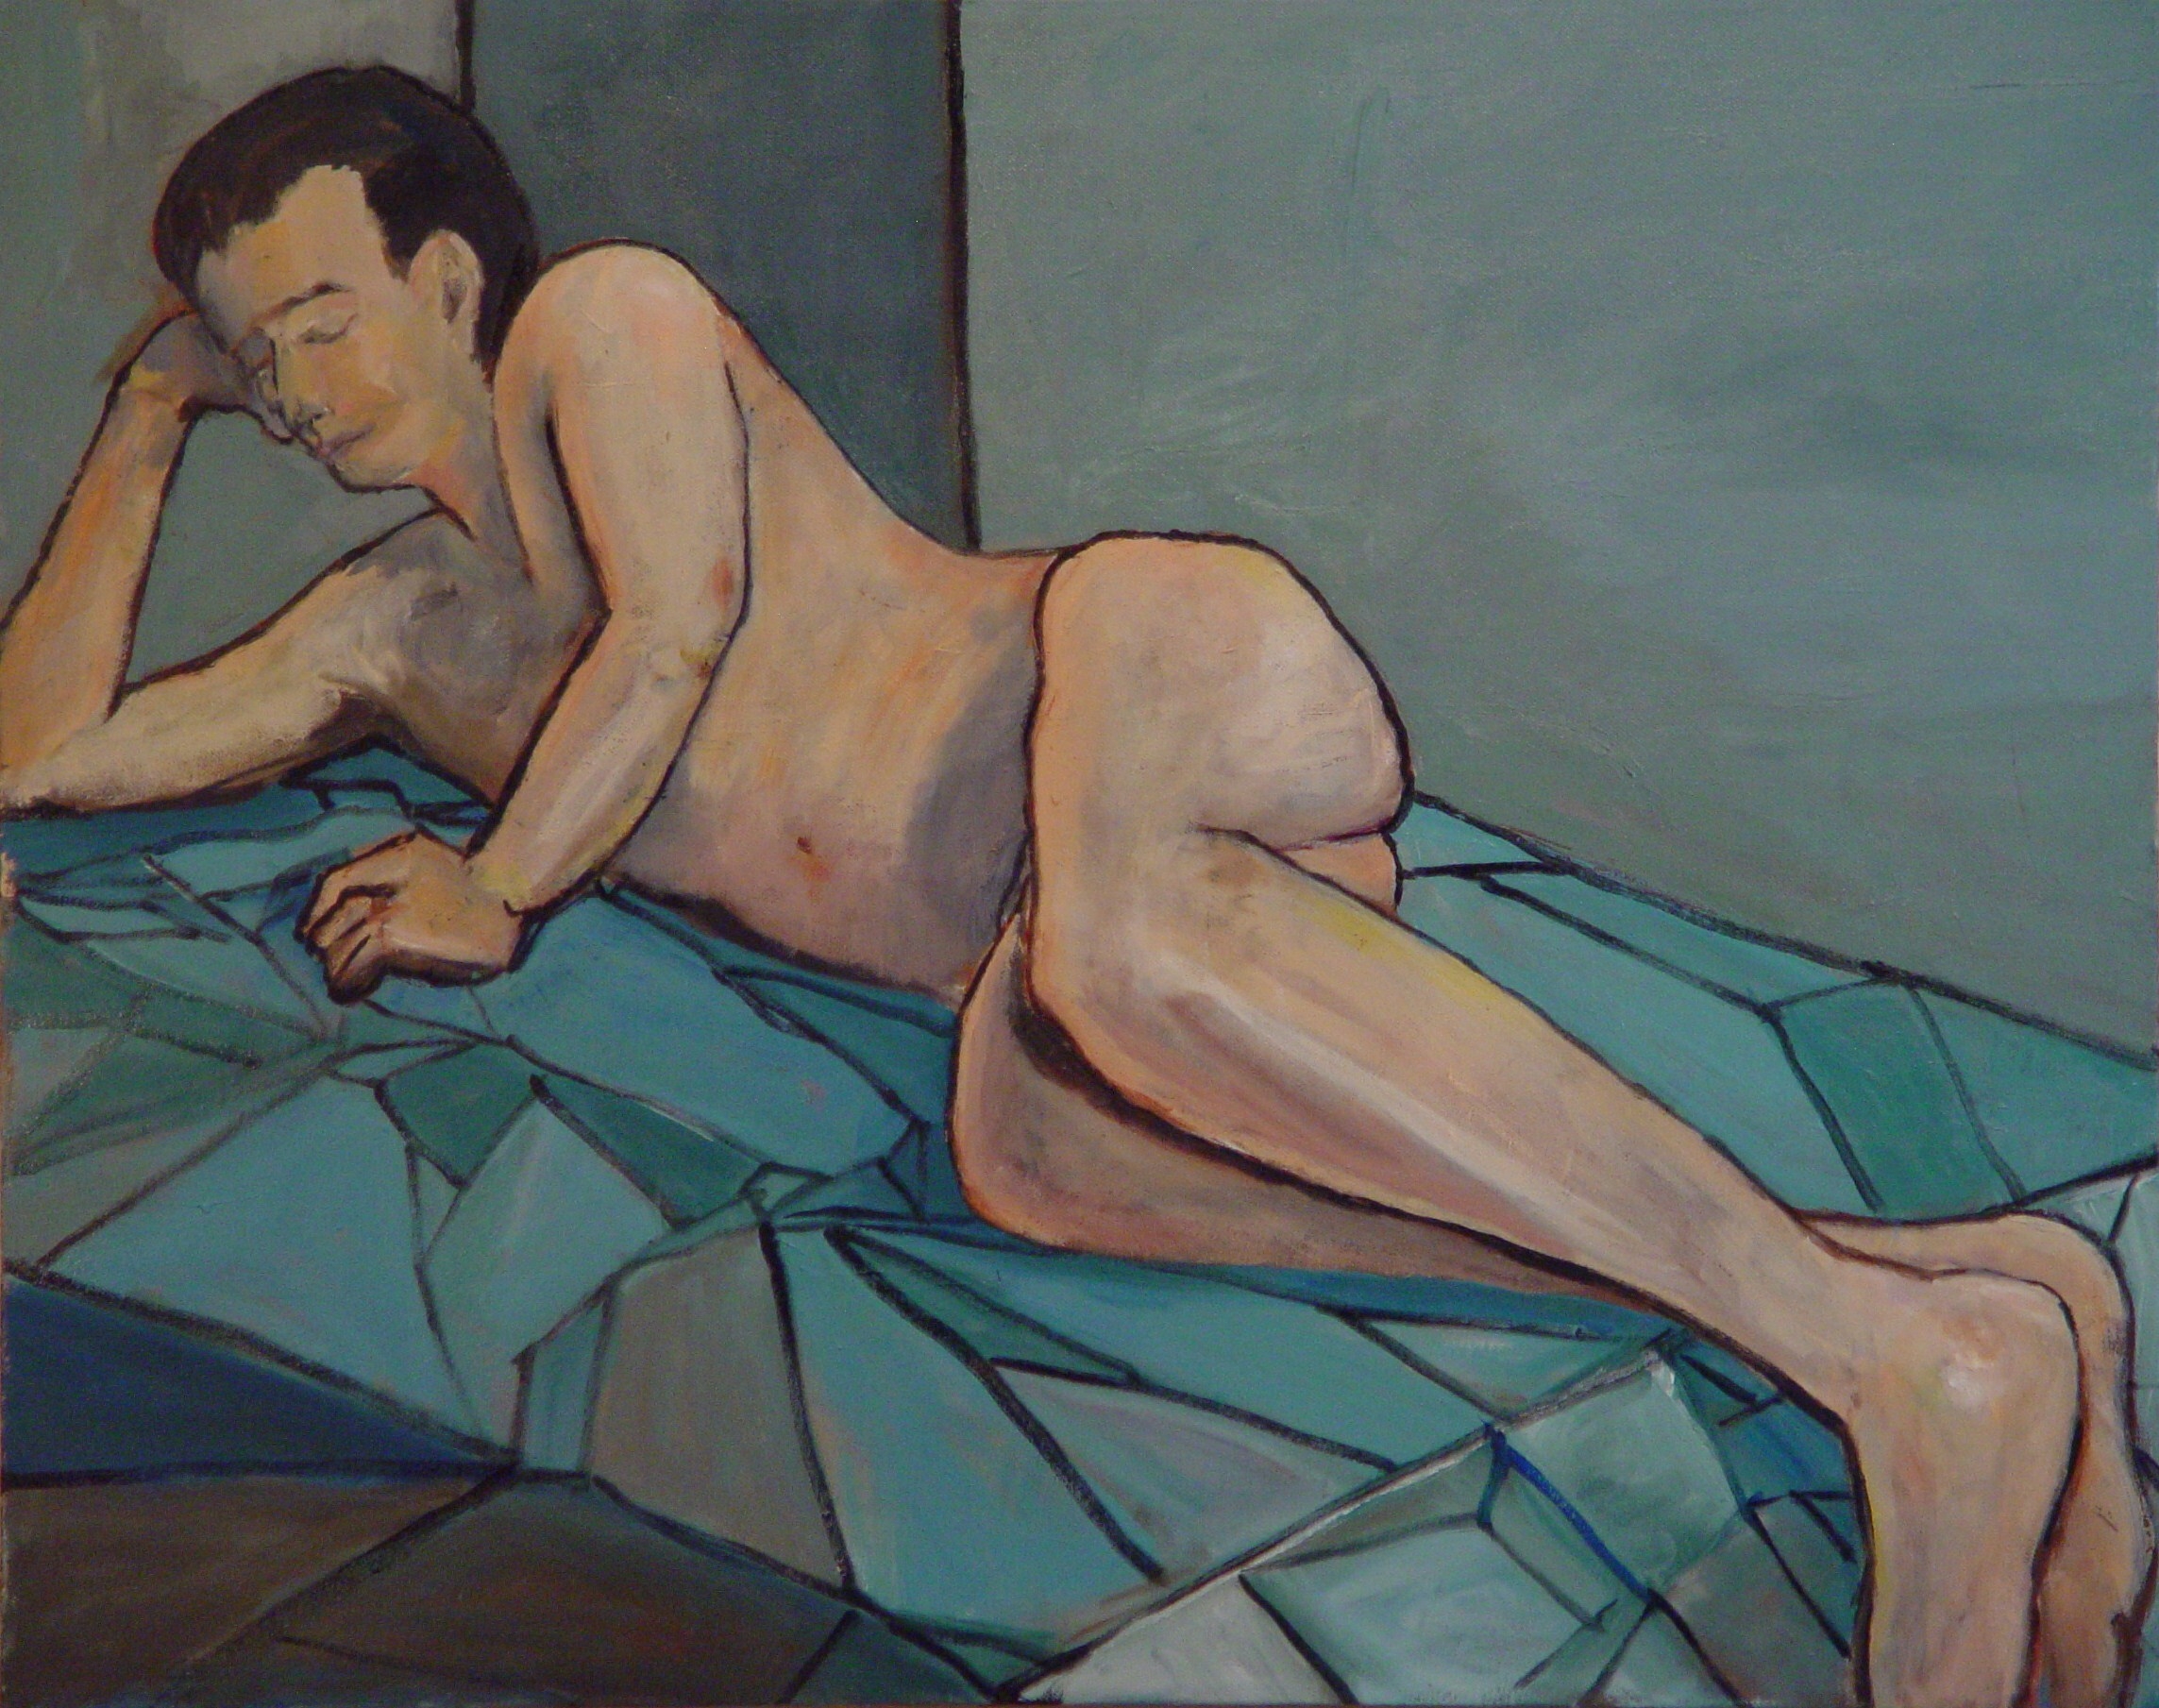 Nude Male Reclining on Blue Coverlet